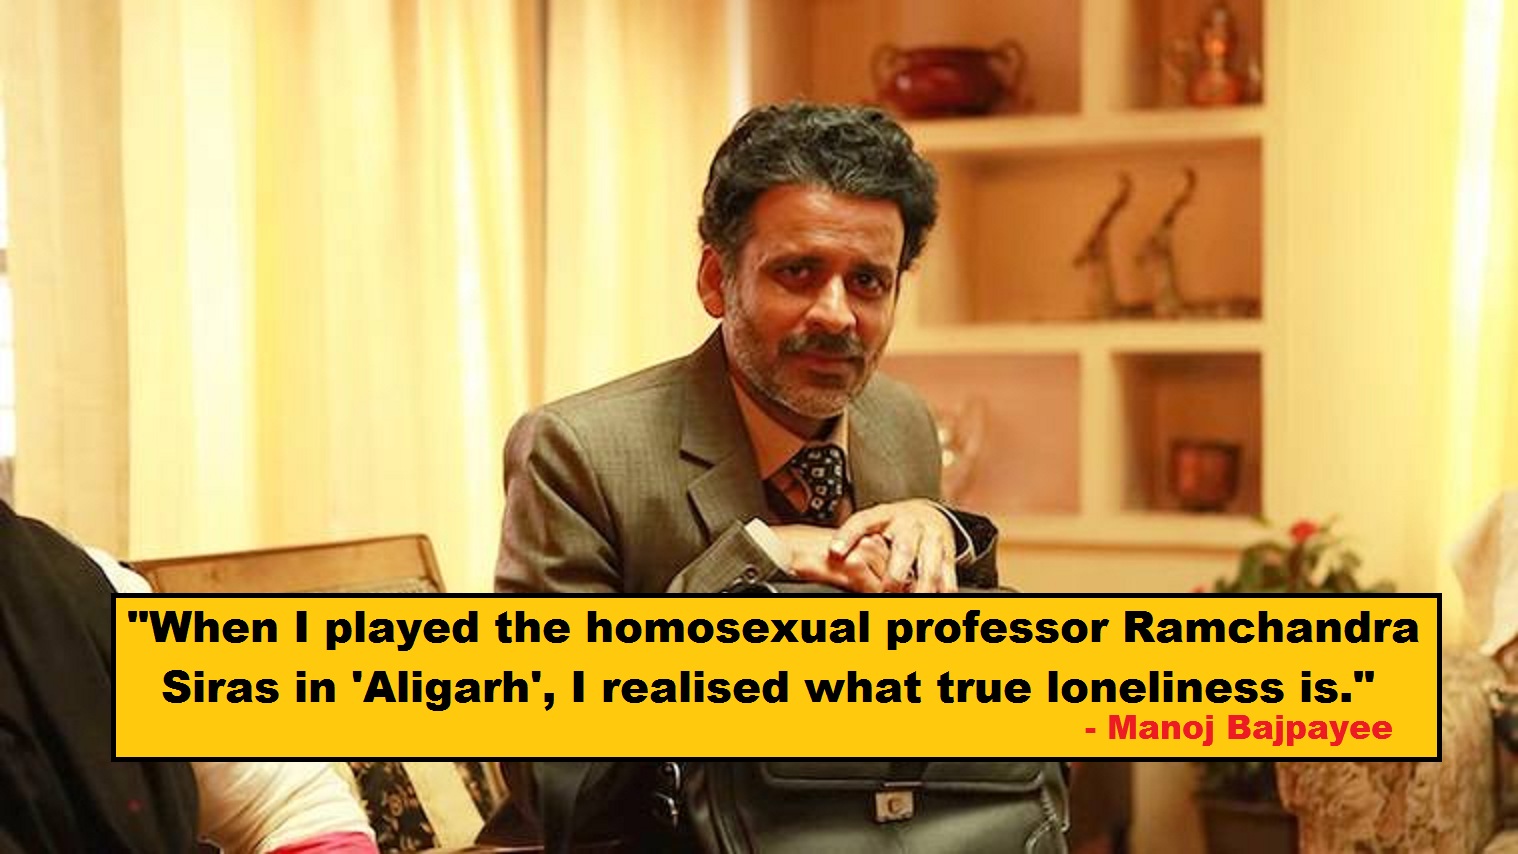 Manoj Bajpayee on Section 377 – The ruling could have saved Aligarh Gay Professor’s Life